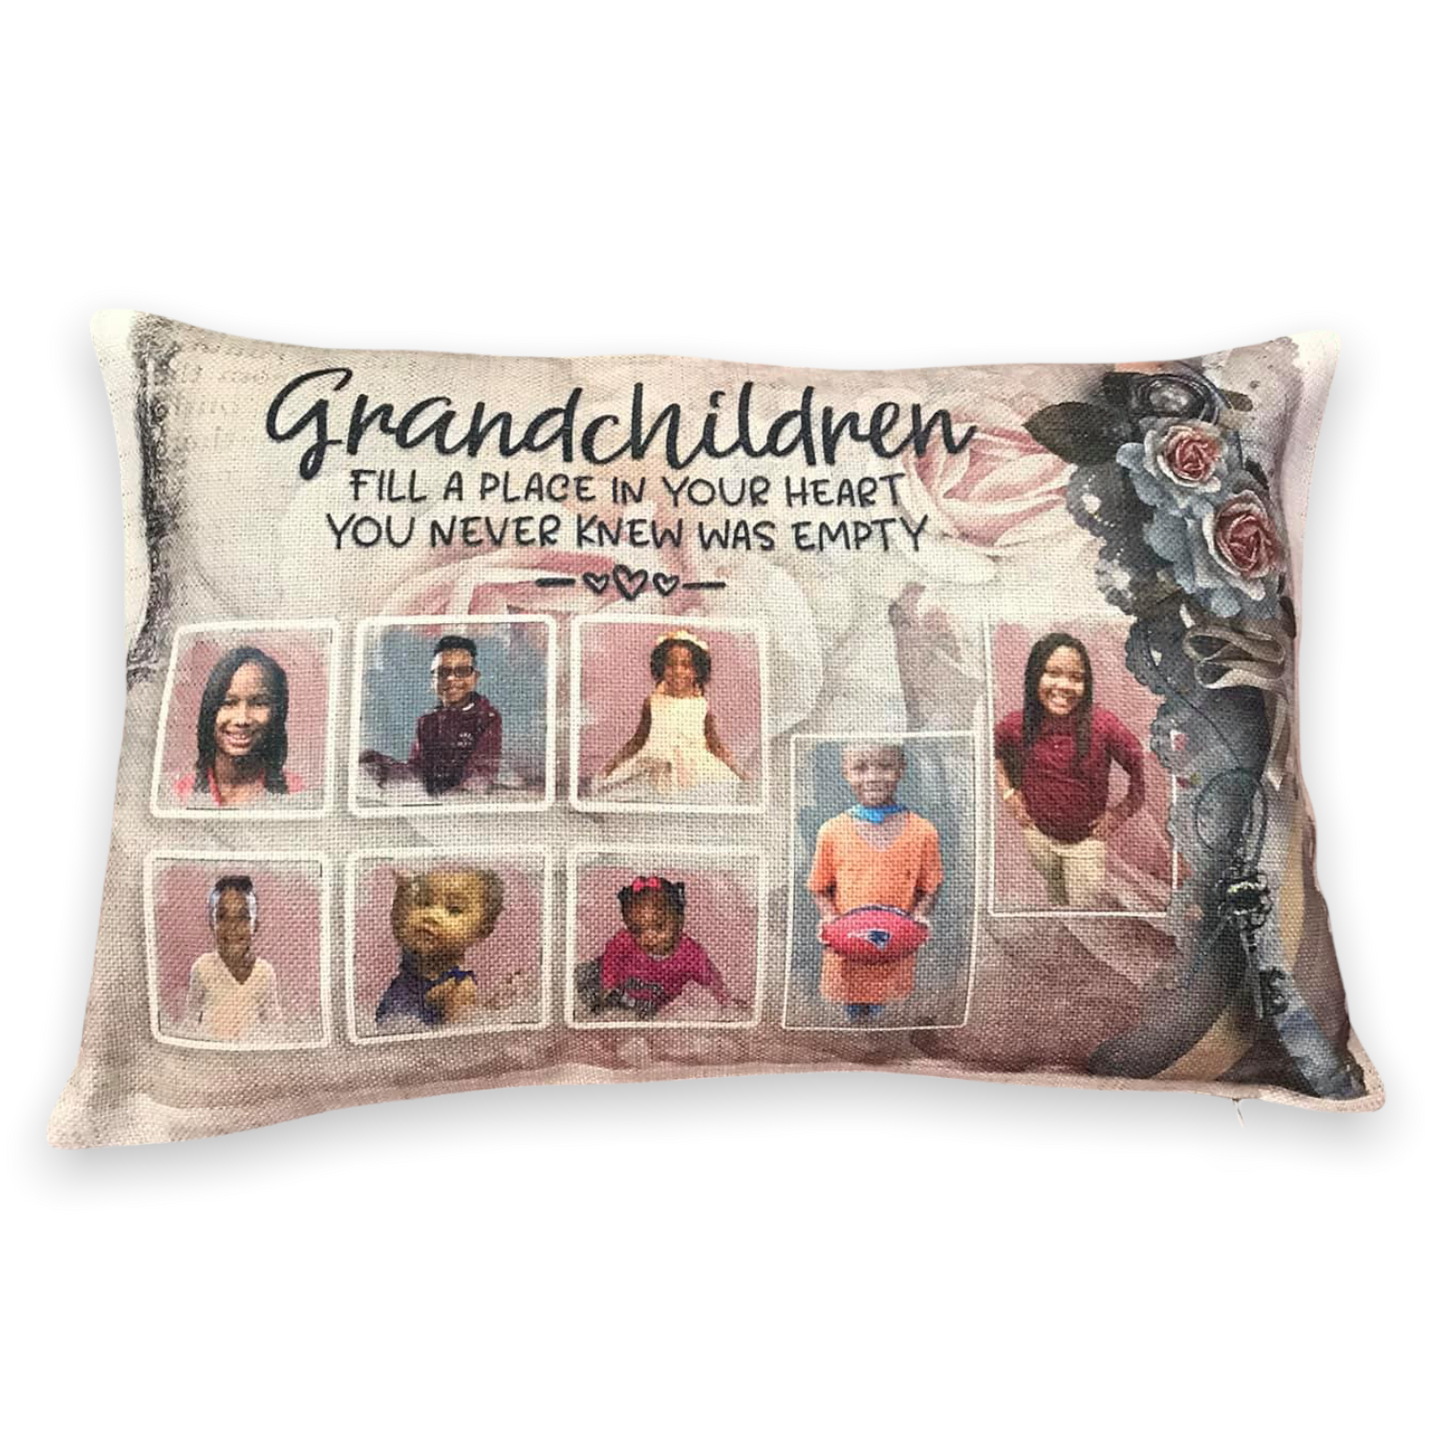 Pillow Cover Linen Sublimation Blank | Natural - Pioneer Supplier & Creations